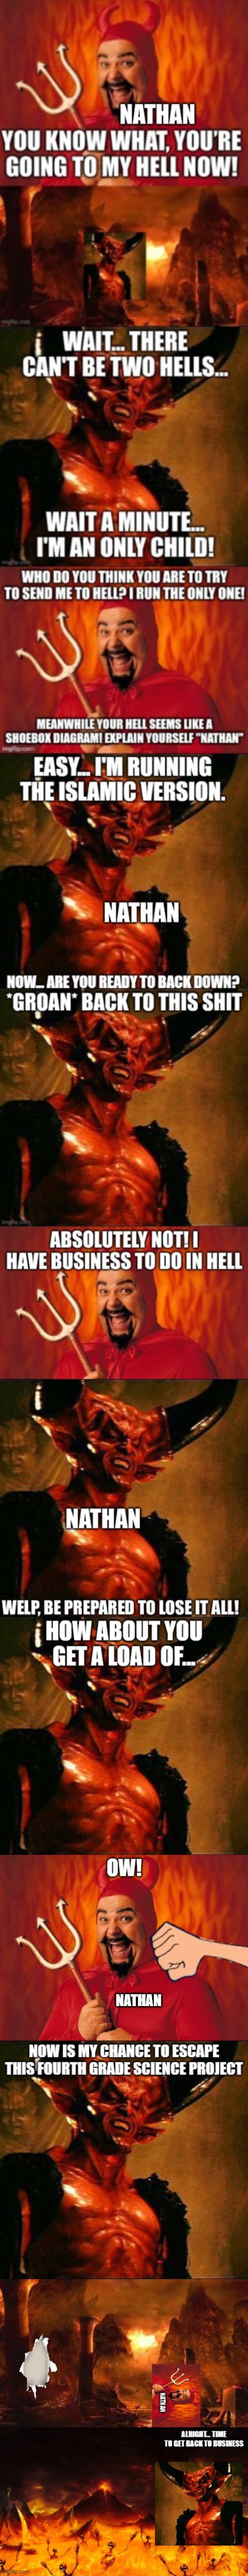 unfortunately, Nathan's "hell" is weak | NATHAN | made w/ Imgflip meme maker